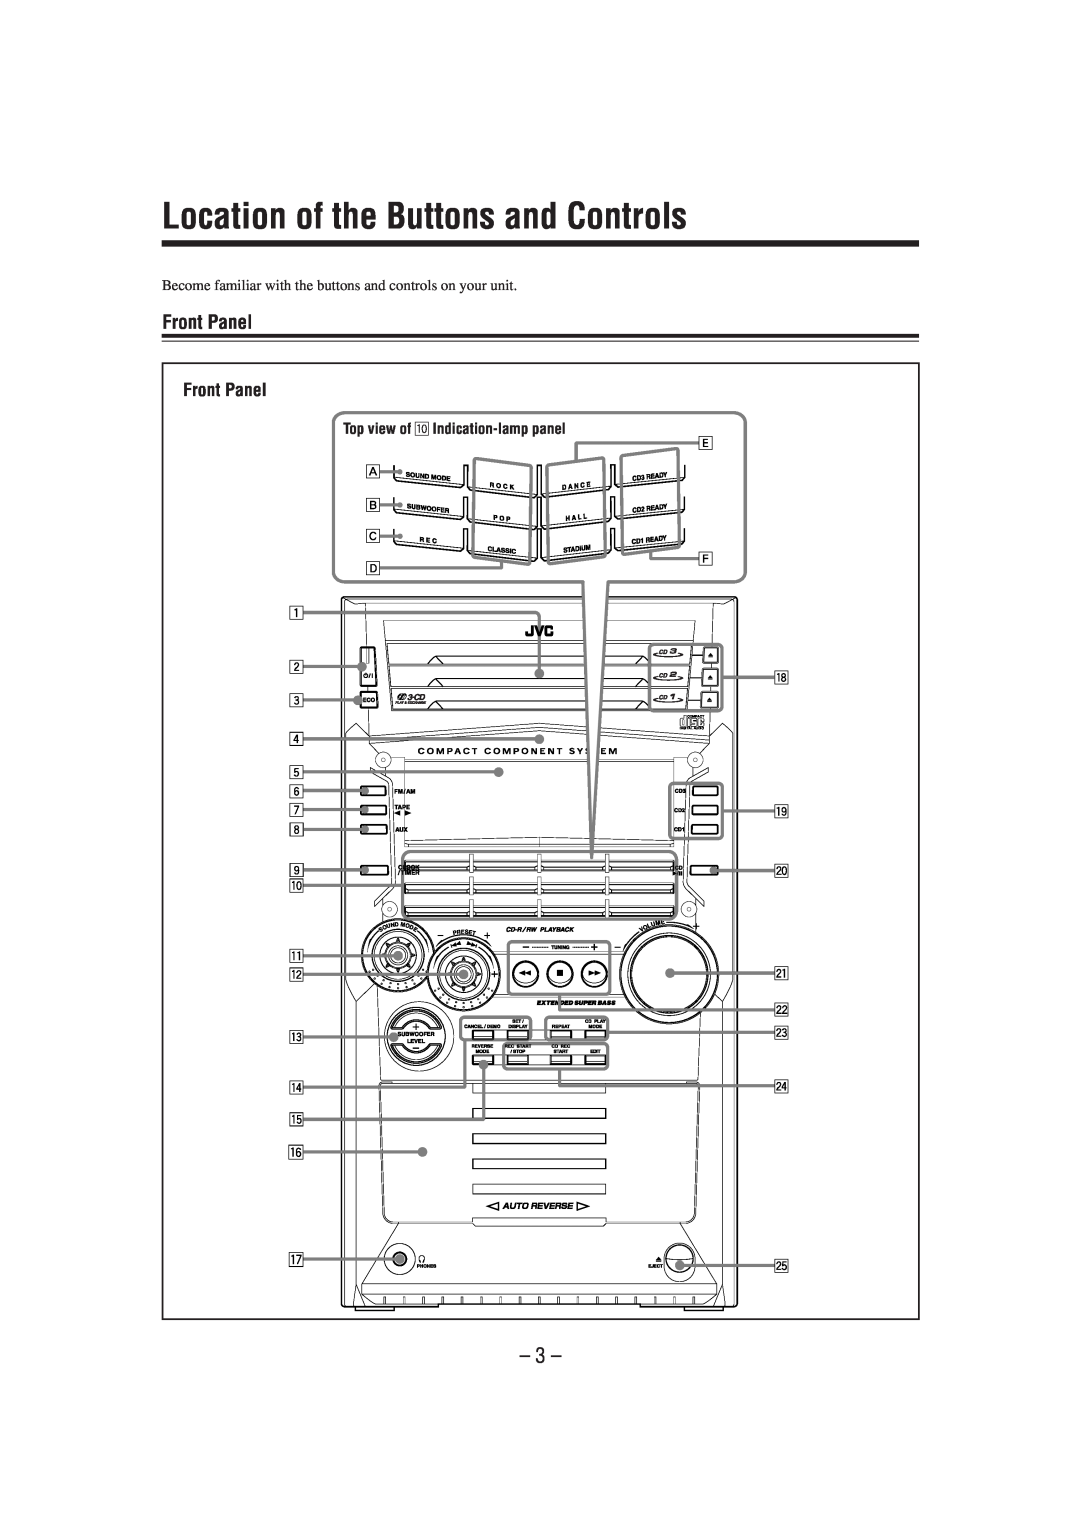 JVC GVT0077-008A manual Location of the Buttons and Controls, Front Panel, Mode, Ound, Lume O, Eset, Compact Digital Audio 